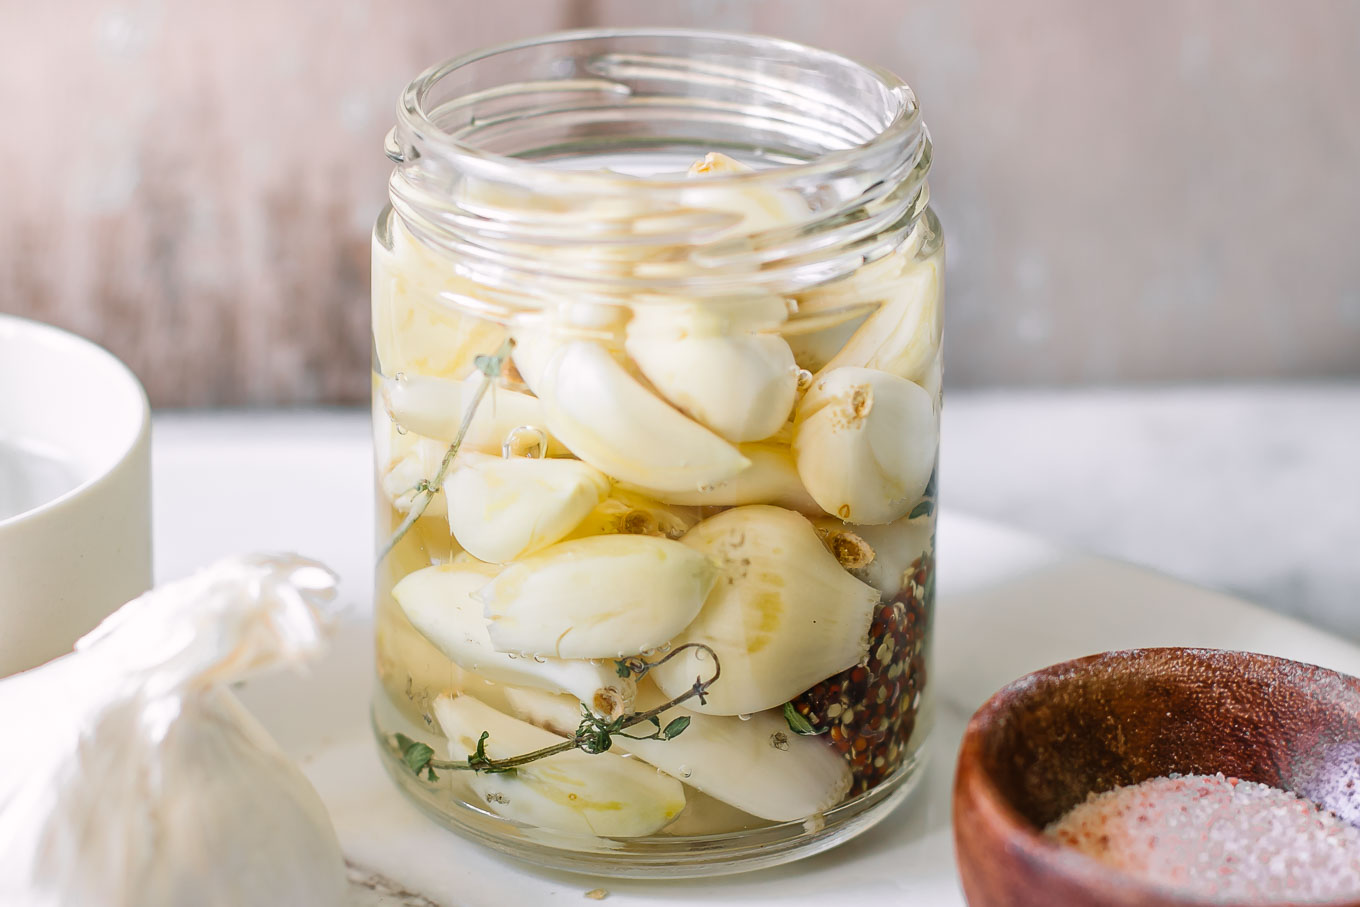 Quick Pickled Garlic ⋆ Refrigerated Pickled Garlic in Only 2 Hours!